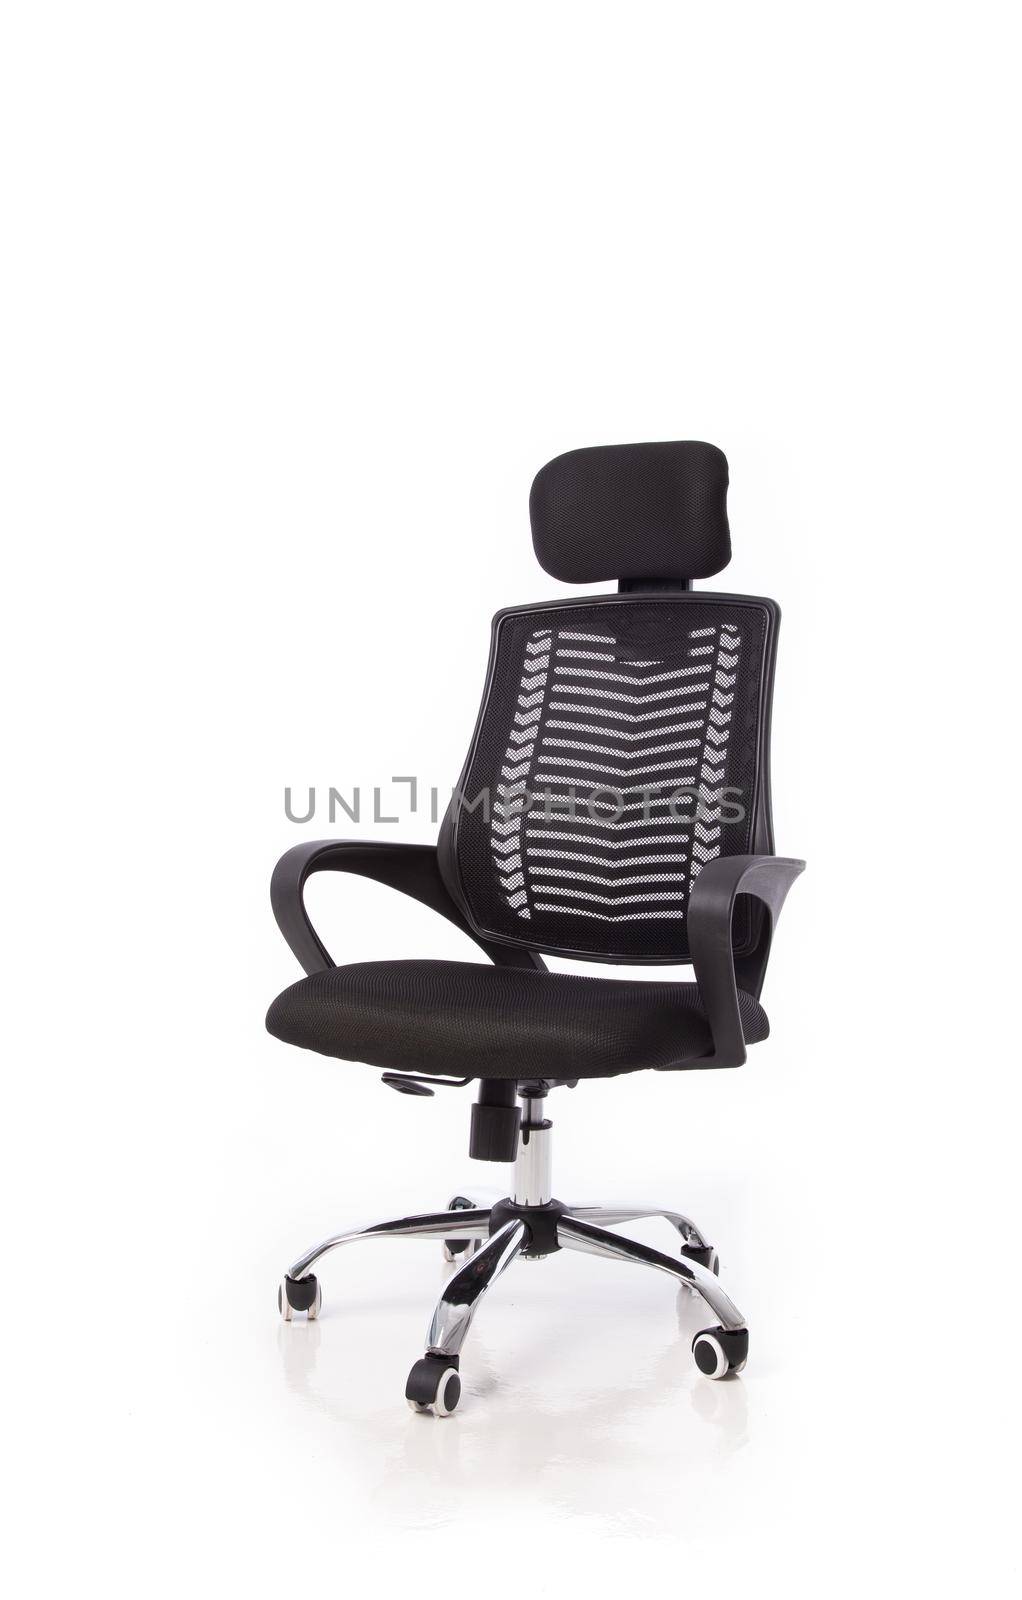 office chair with black backrest, black seat and handles, isolated on white background by tehcheesiong